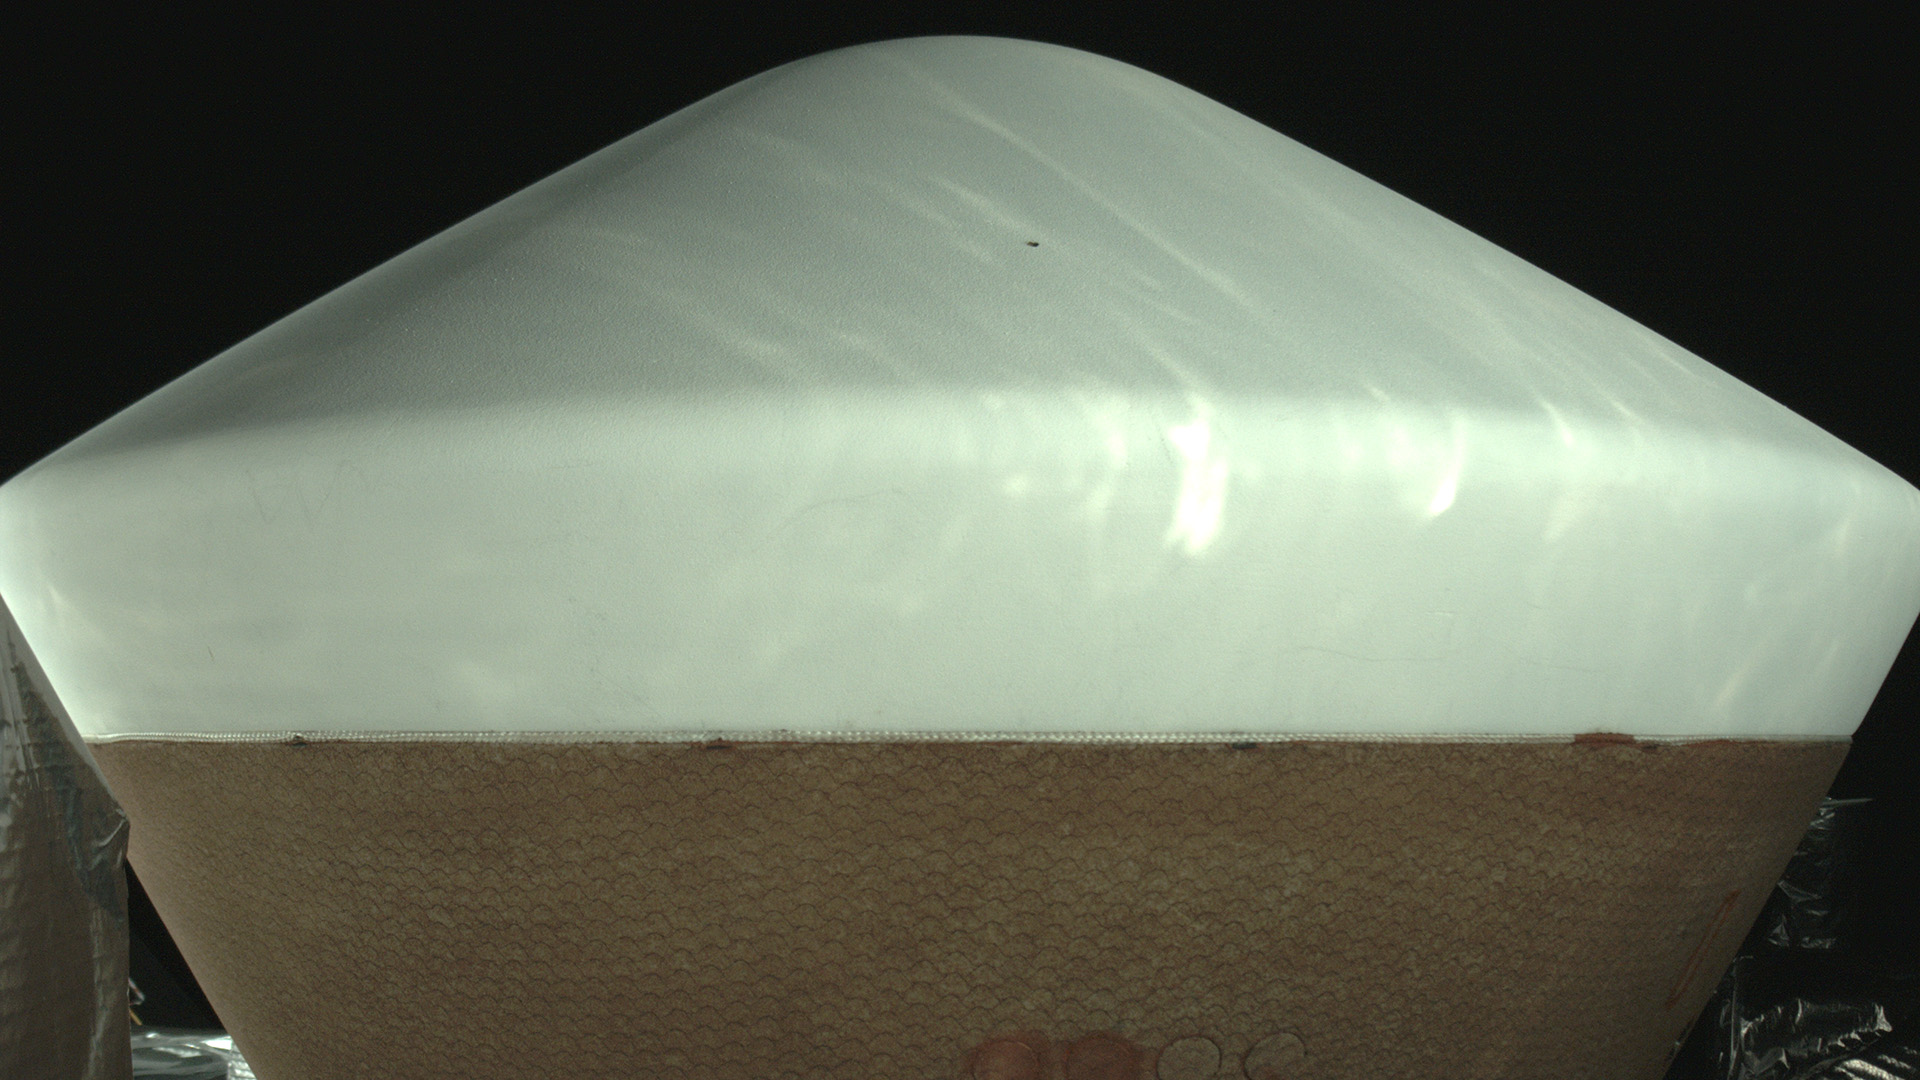 A poppy-seed-sized dent (the black spot near the top) was discovered on the heat shield of the OSIRIS-REx sample-return capsule in an image taken by an on-board camera March 2, 2017. The damage won't affect the capsule's performance.